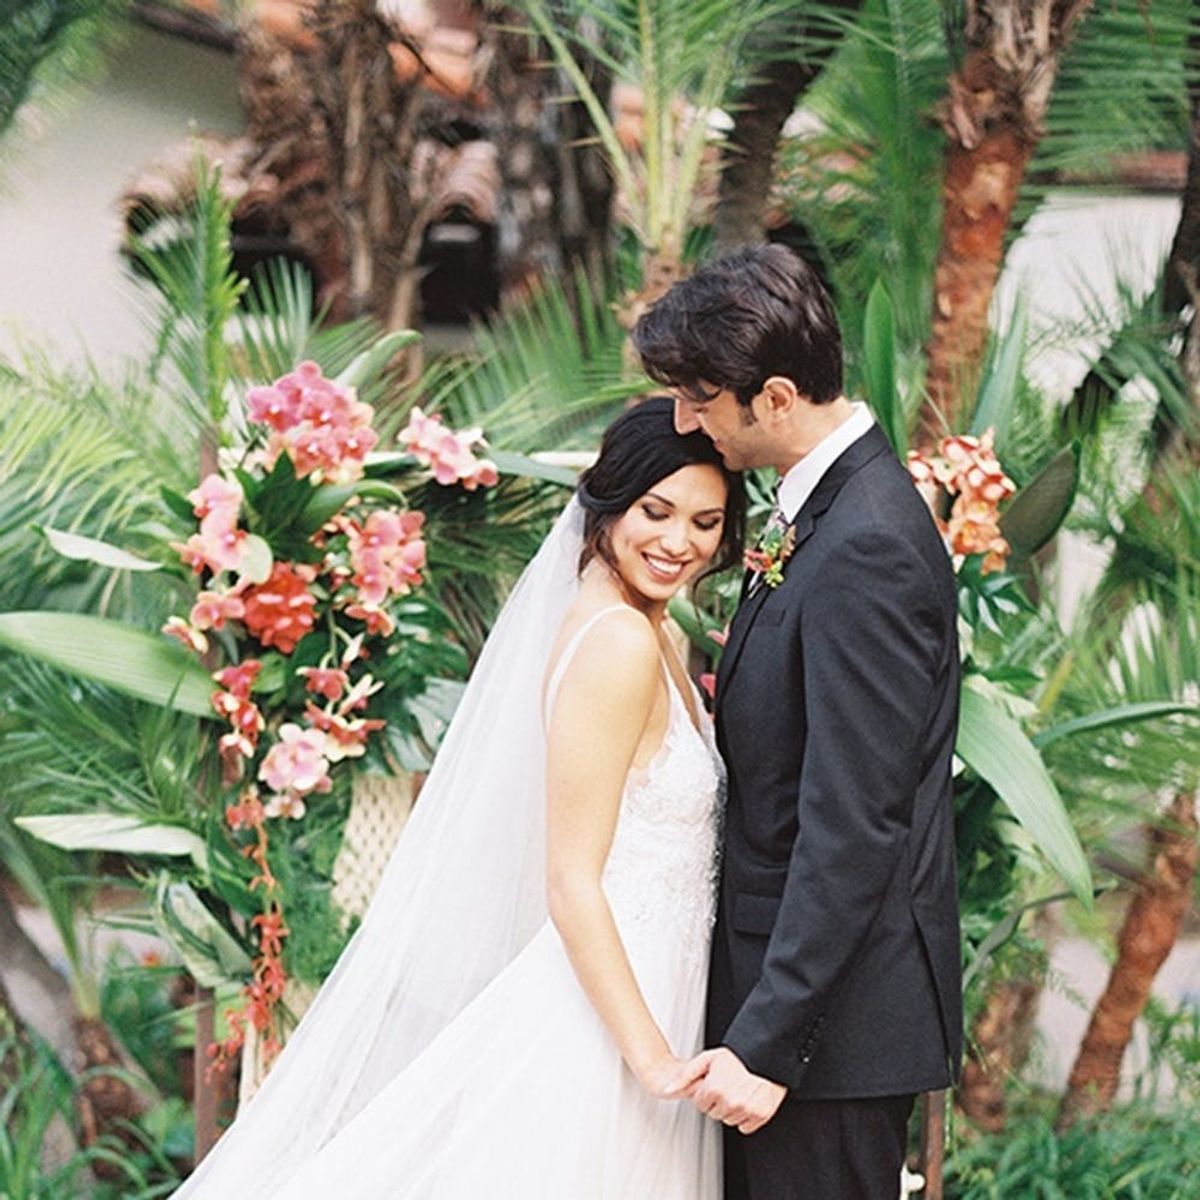 This Tropical Wedding Shoot Is Pure Destination Inspo